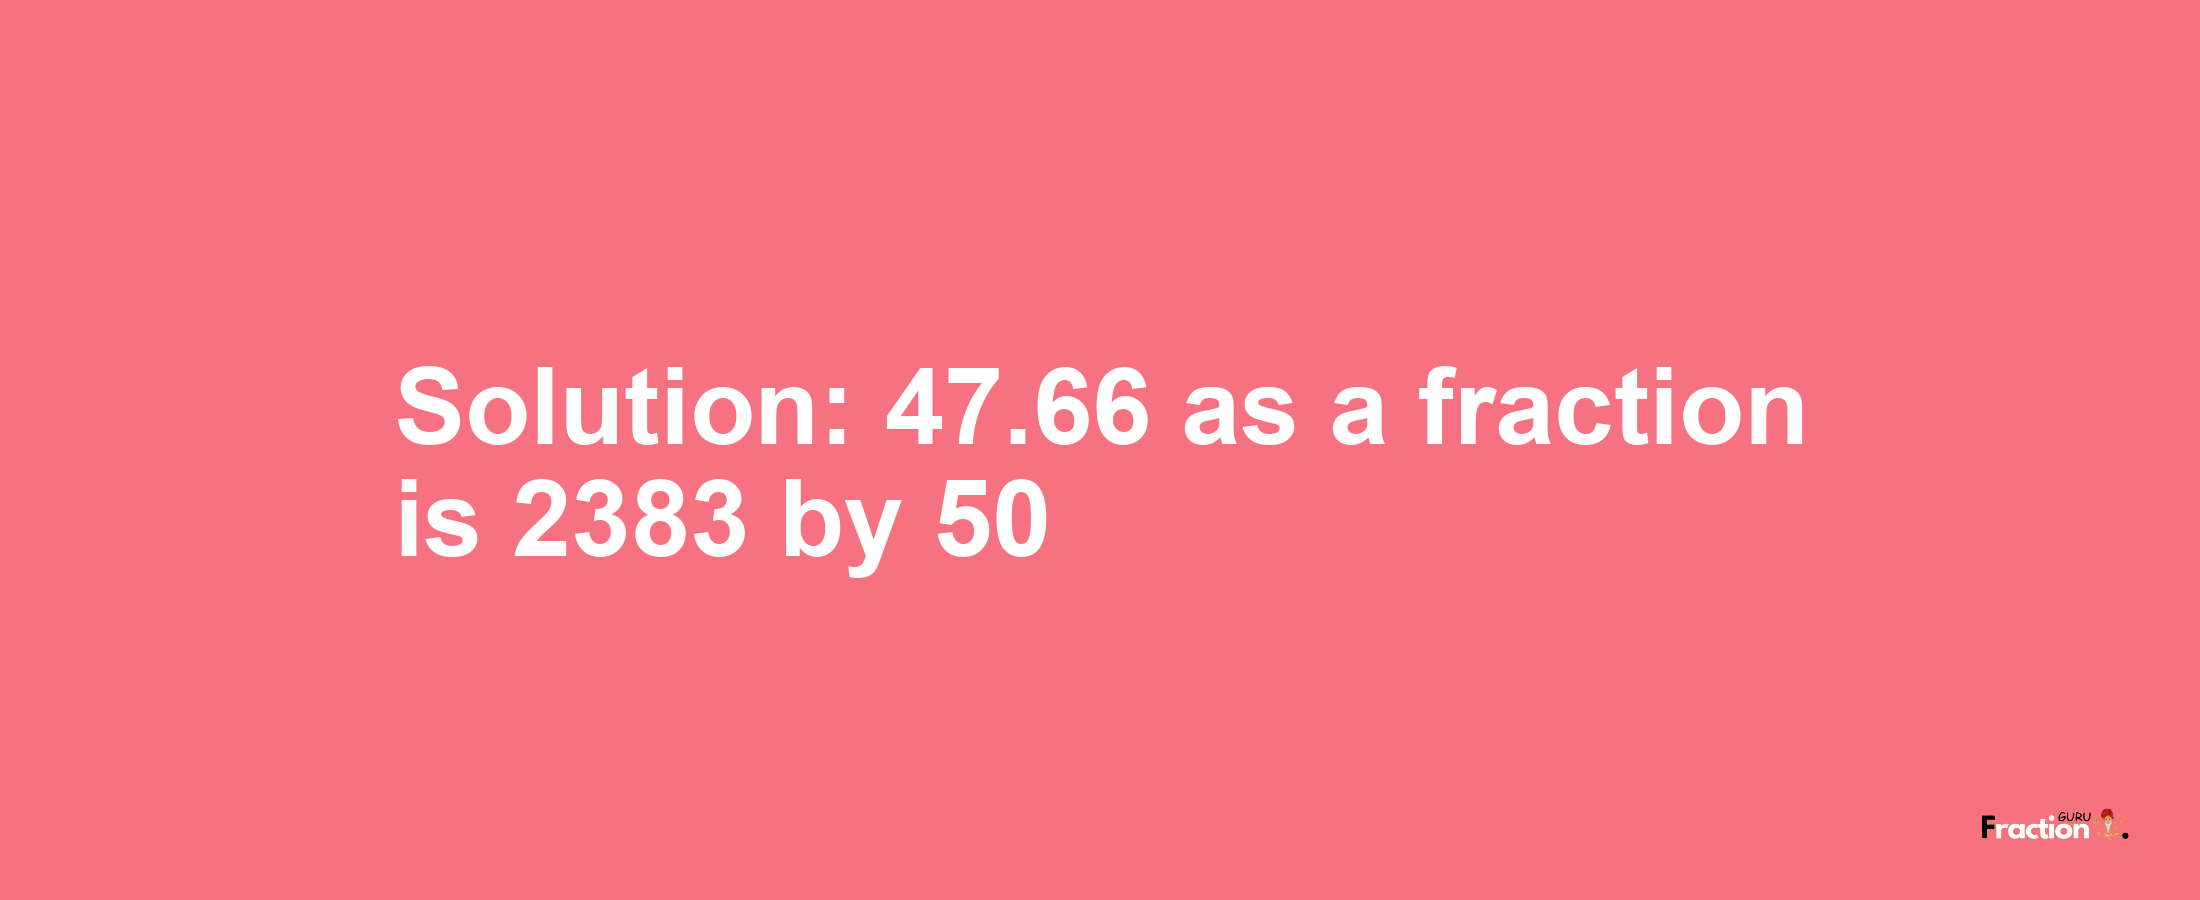 Solution:47.66 as a fraction is 2383/50